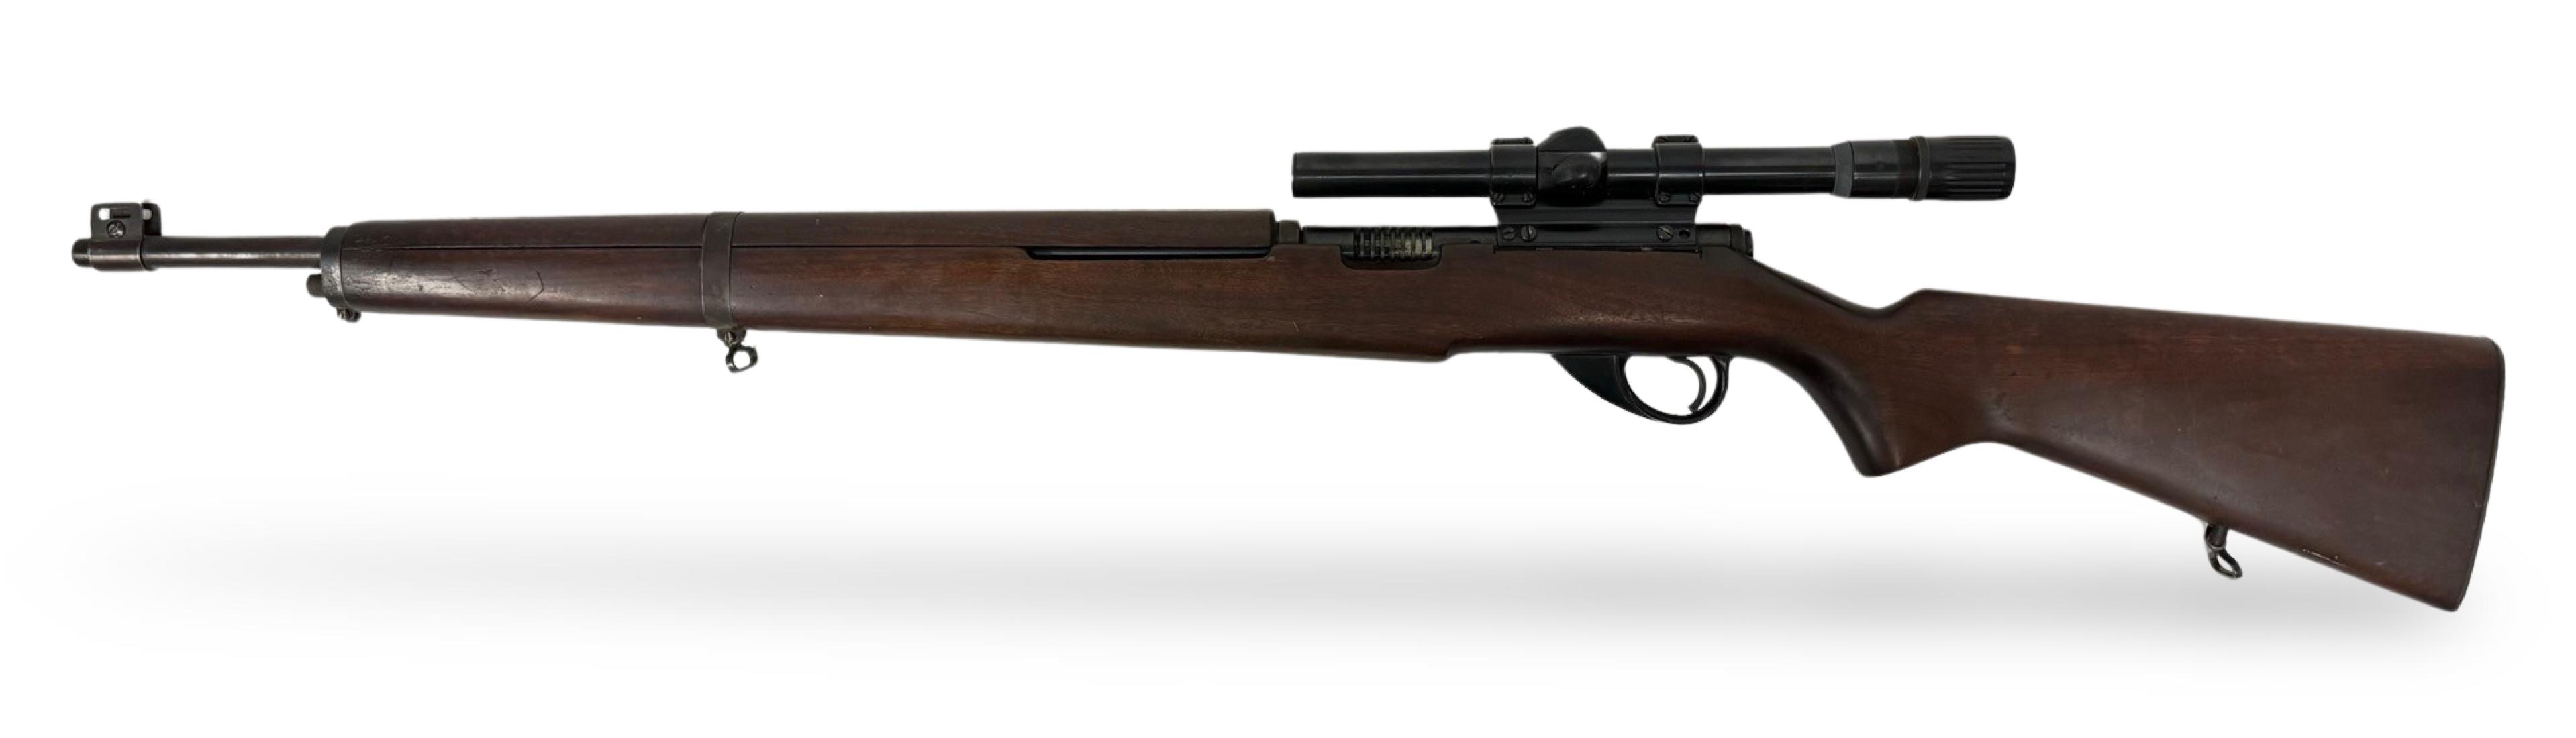 Ranger Arms 101.16 Semi-Automatic .22-S-L-LR Military Trainer Style Rifle